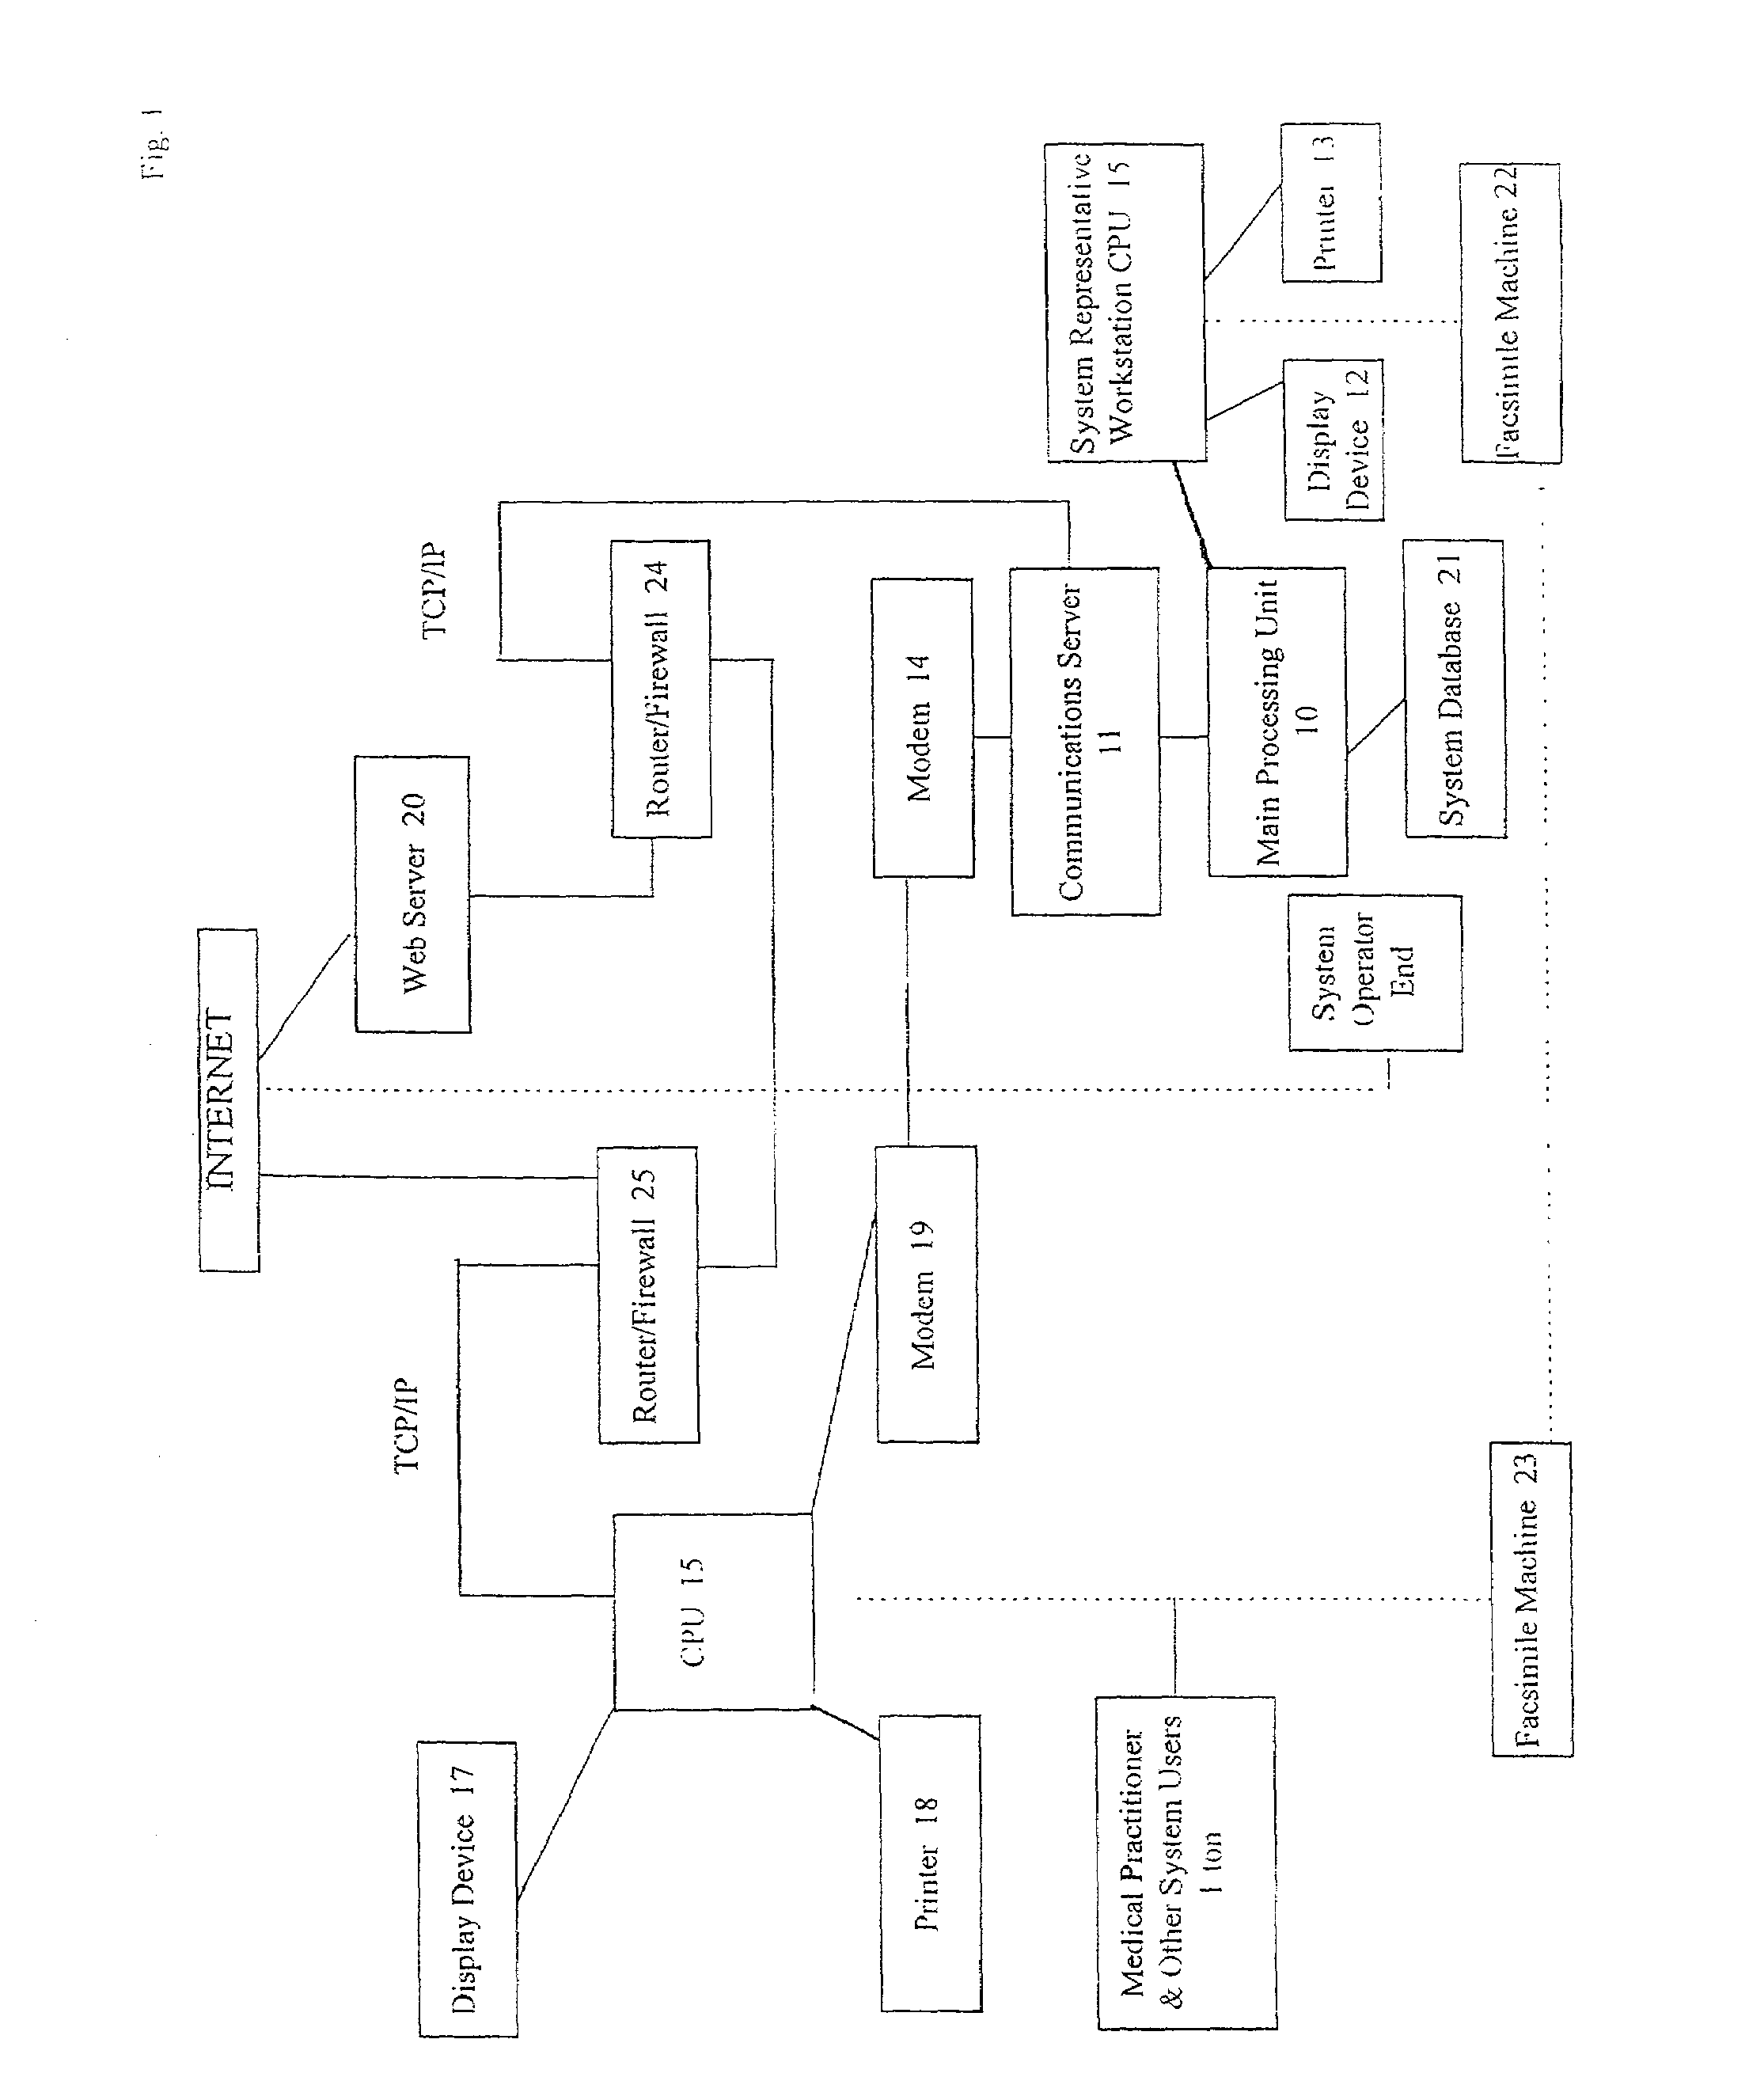 Method and system for providing pre and post operative support and care